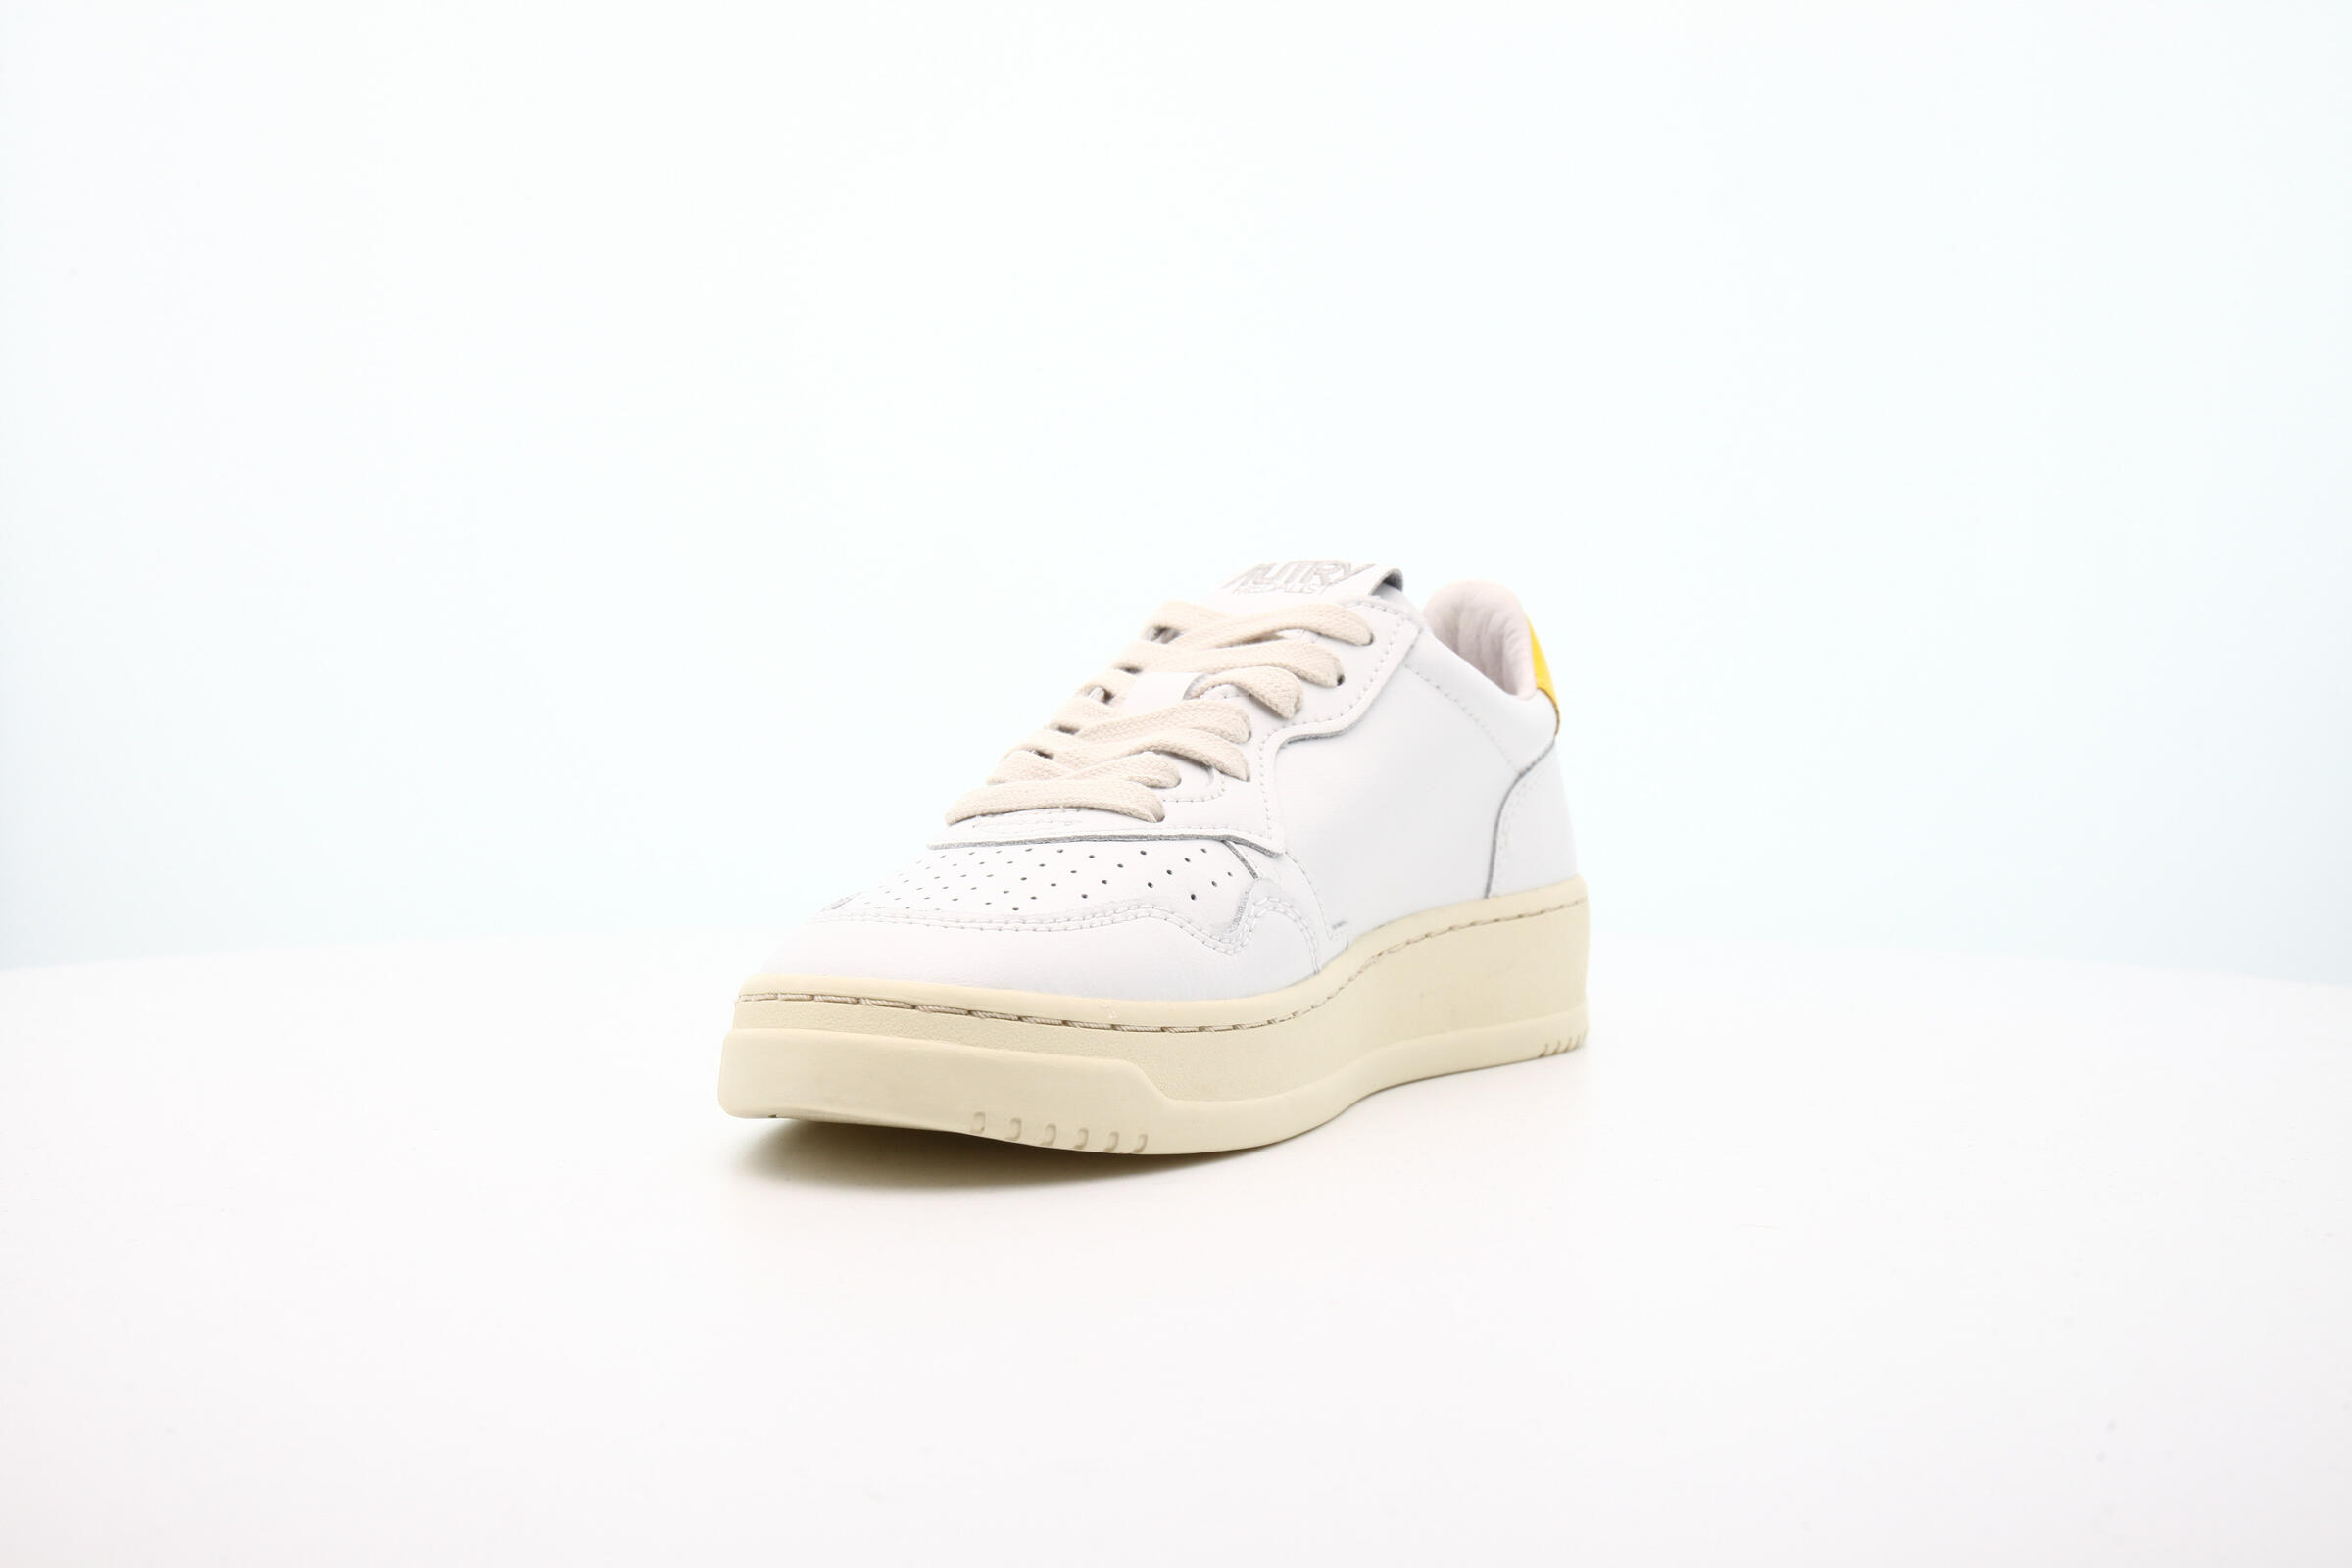 Autry Action Shoes WMNS MEDALIST LOW "YELLOW"